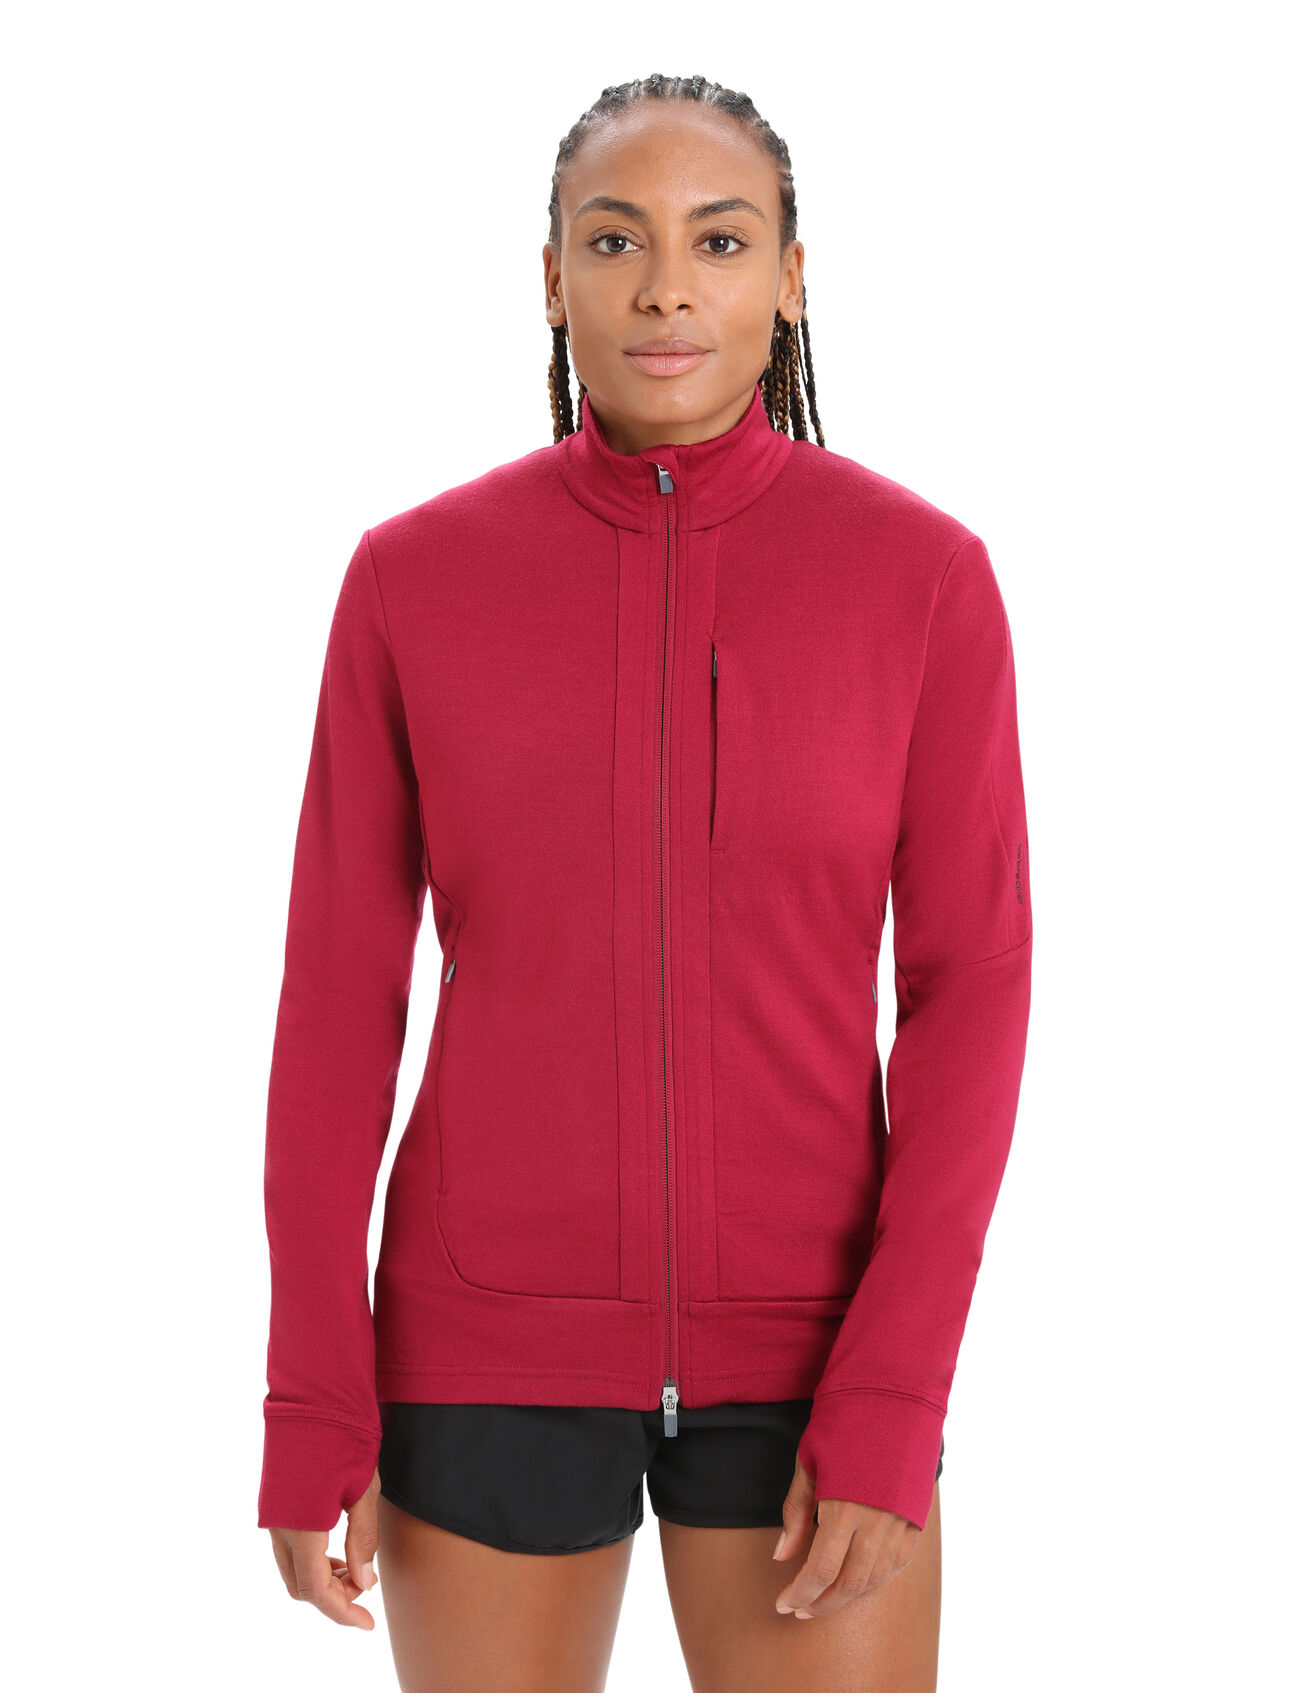 Womens Merino Quantum III Long Sleeve Zip A 100% merino wool mid layer ideal for technical mountain adventures, the Quantum III Long Sleeve Zip helps regulate your body temperature when you're on the move.